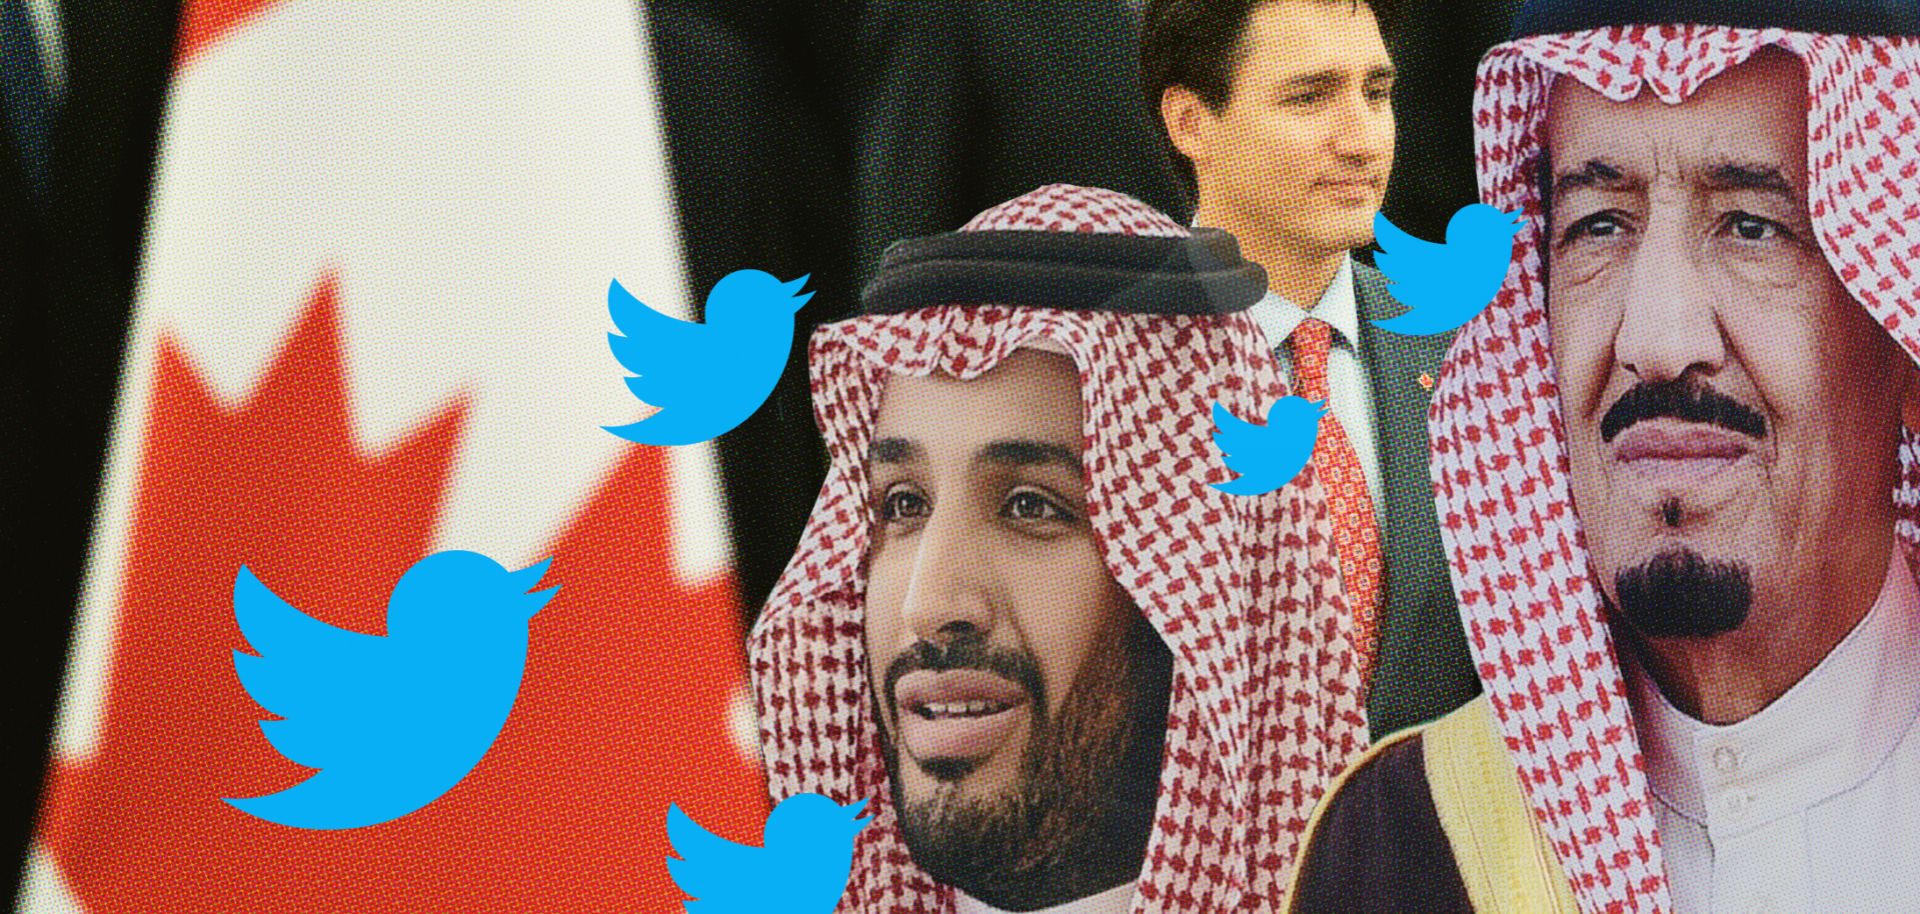 The cultural differences between Saudi Arabia and Canada can help explain how the reaction to a tweet developed into a major diplomatic rift.